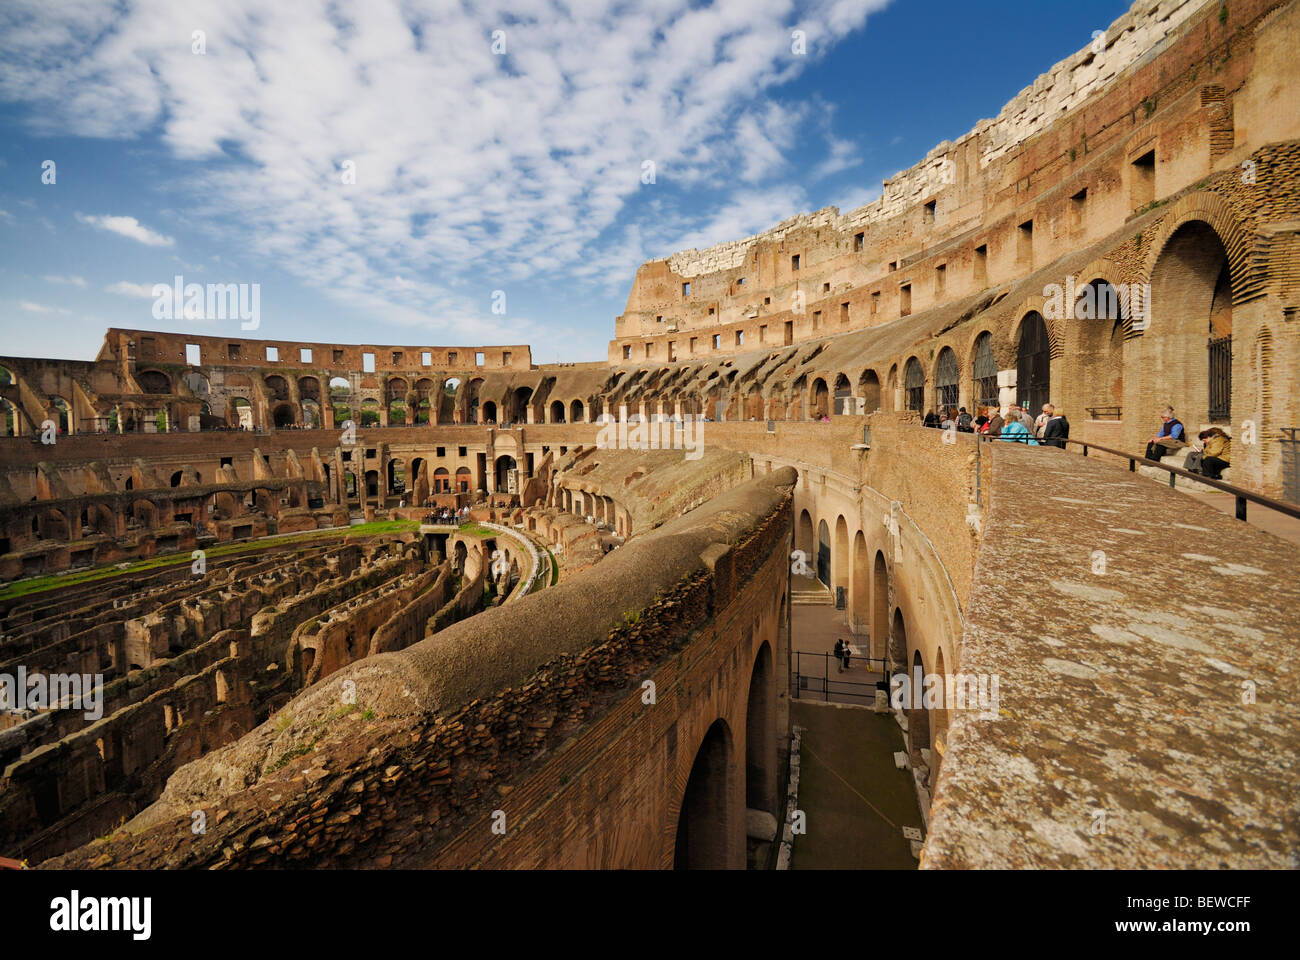 View over the internal space of the Colosseum, Rome, Italy Stock Photo